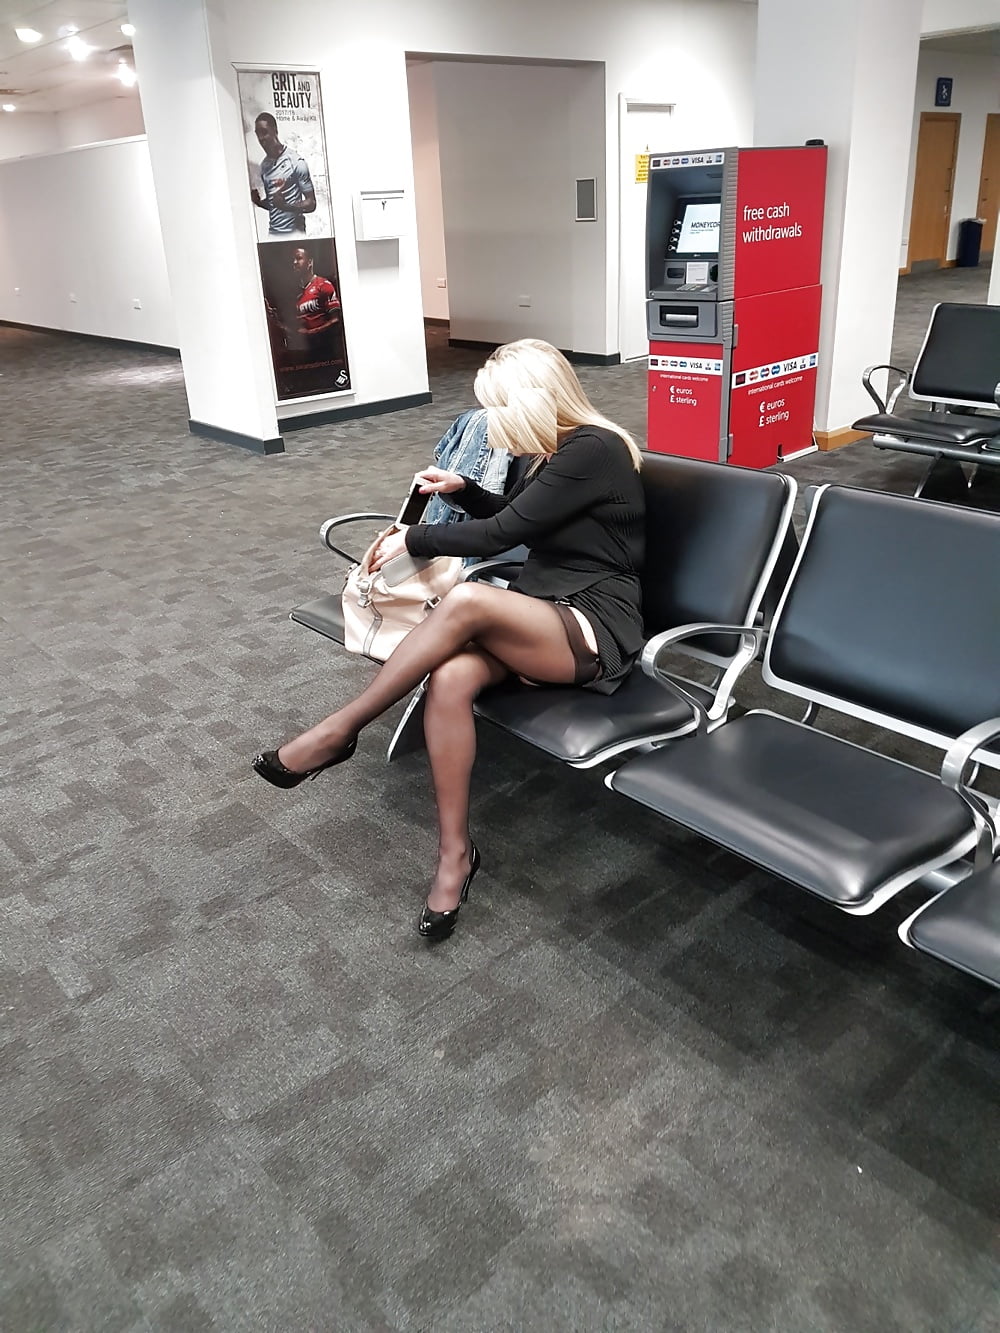 Watch Airport - 3 Pics at xHamster.com! xHamster is the best porn site to g...